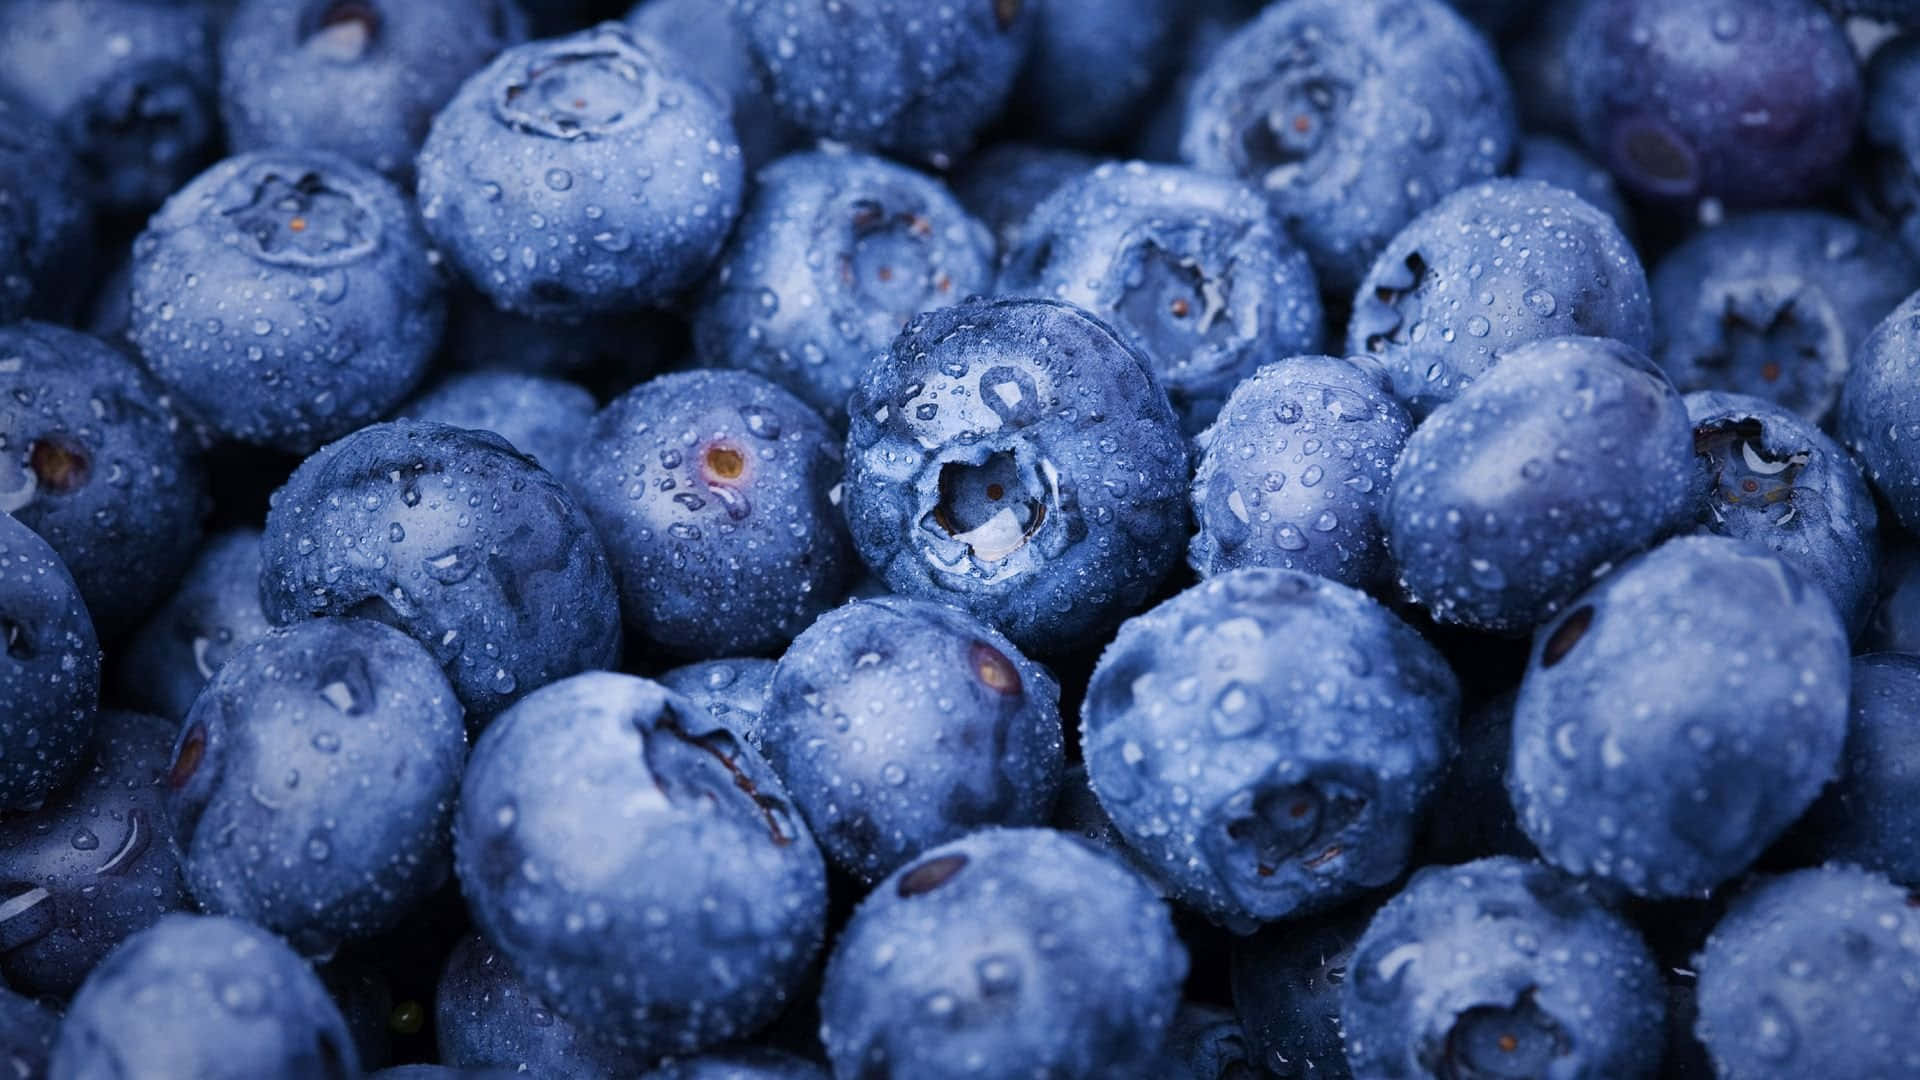 Blueberries Are Piled Up In A Pile